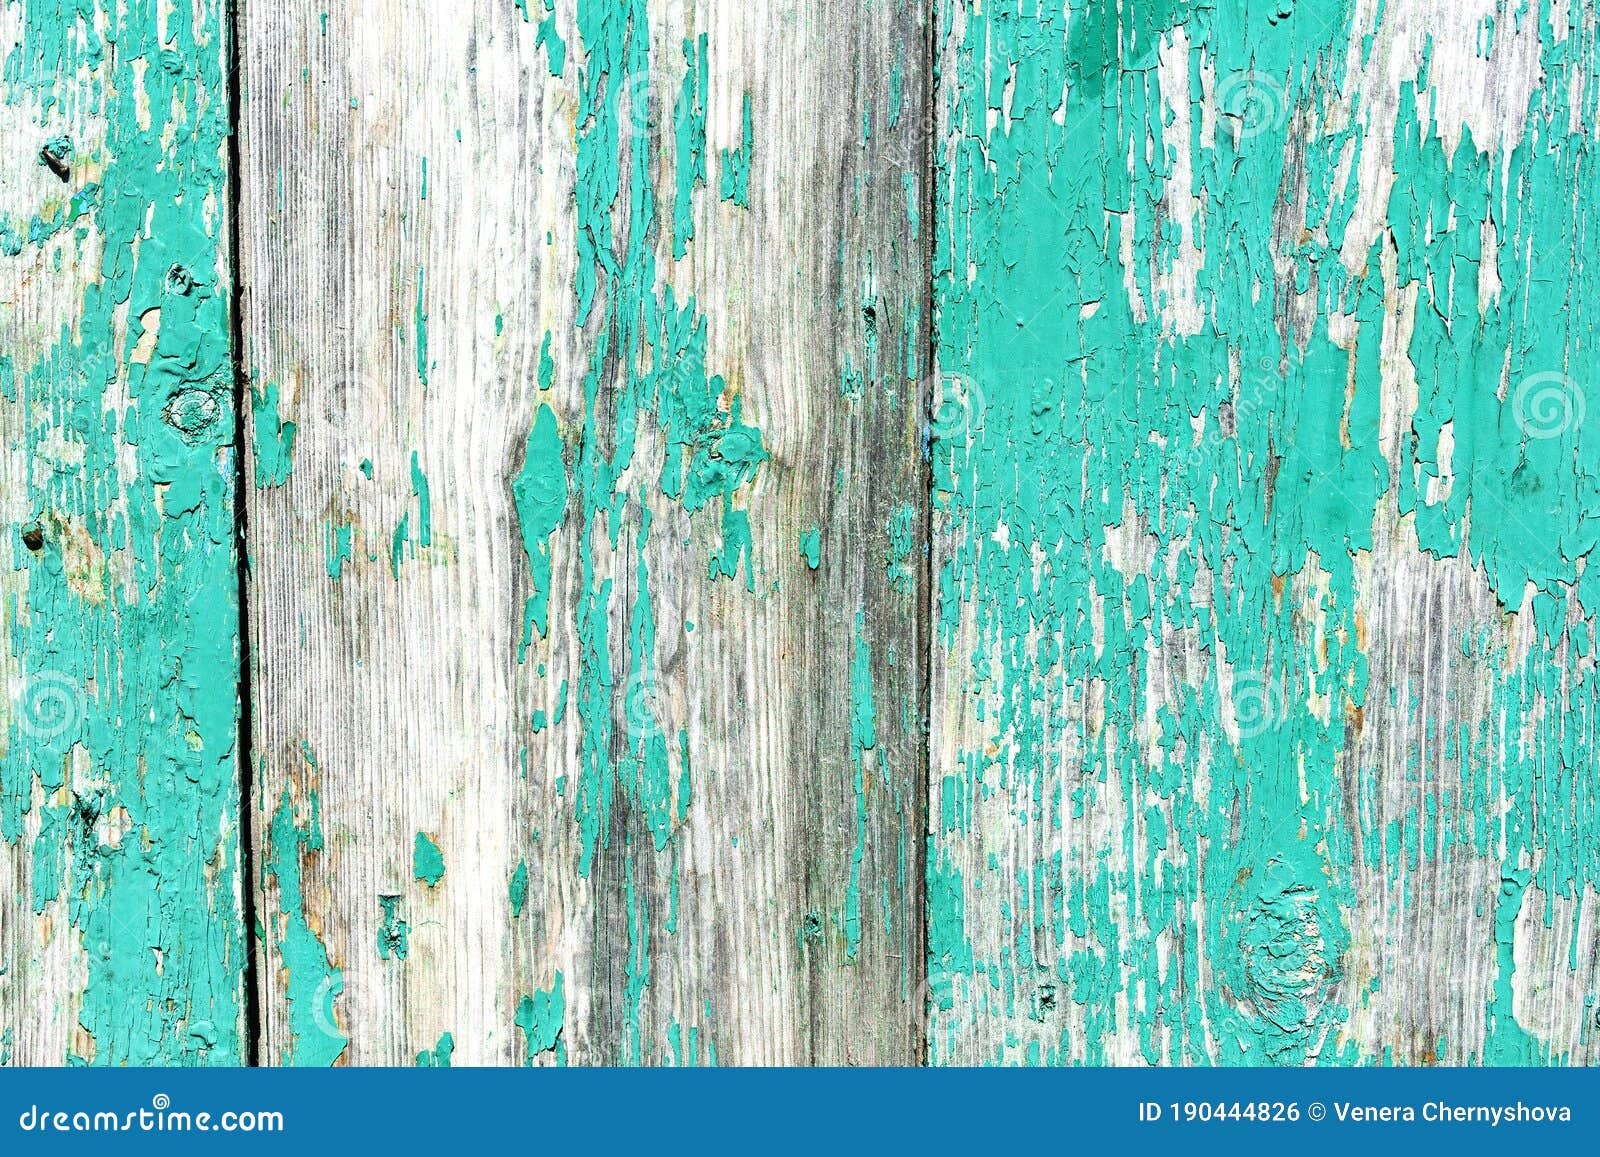 Old Rustic Painted Cracky Green, Turquoise Wooden Texture or ...